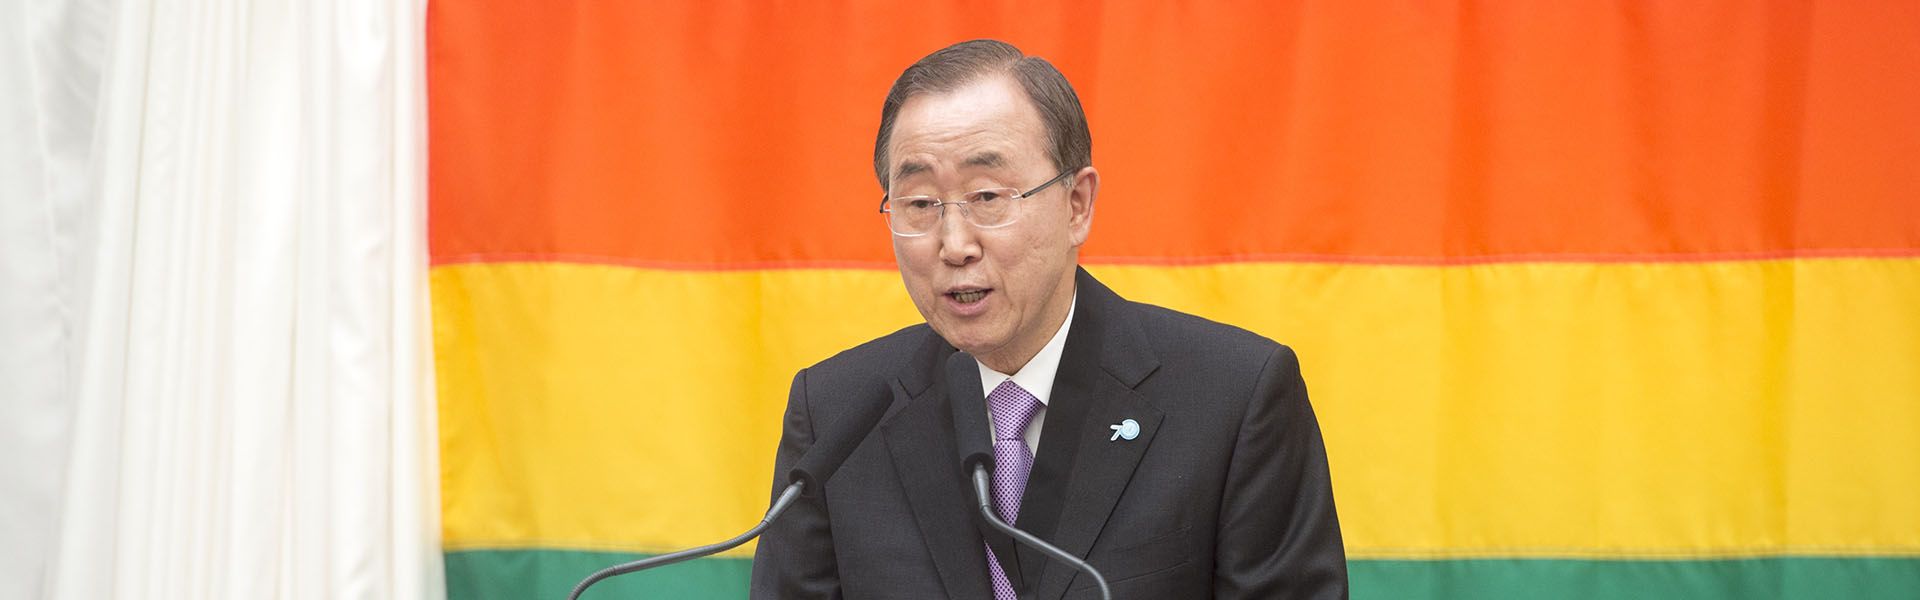 The UN and the Rights of LGBTI People